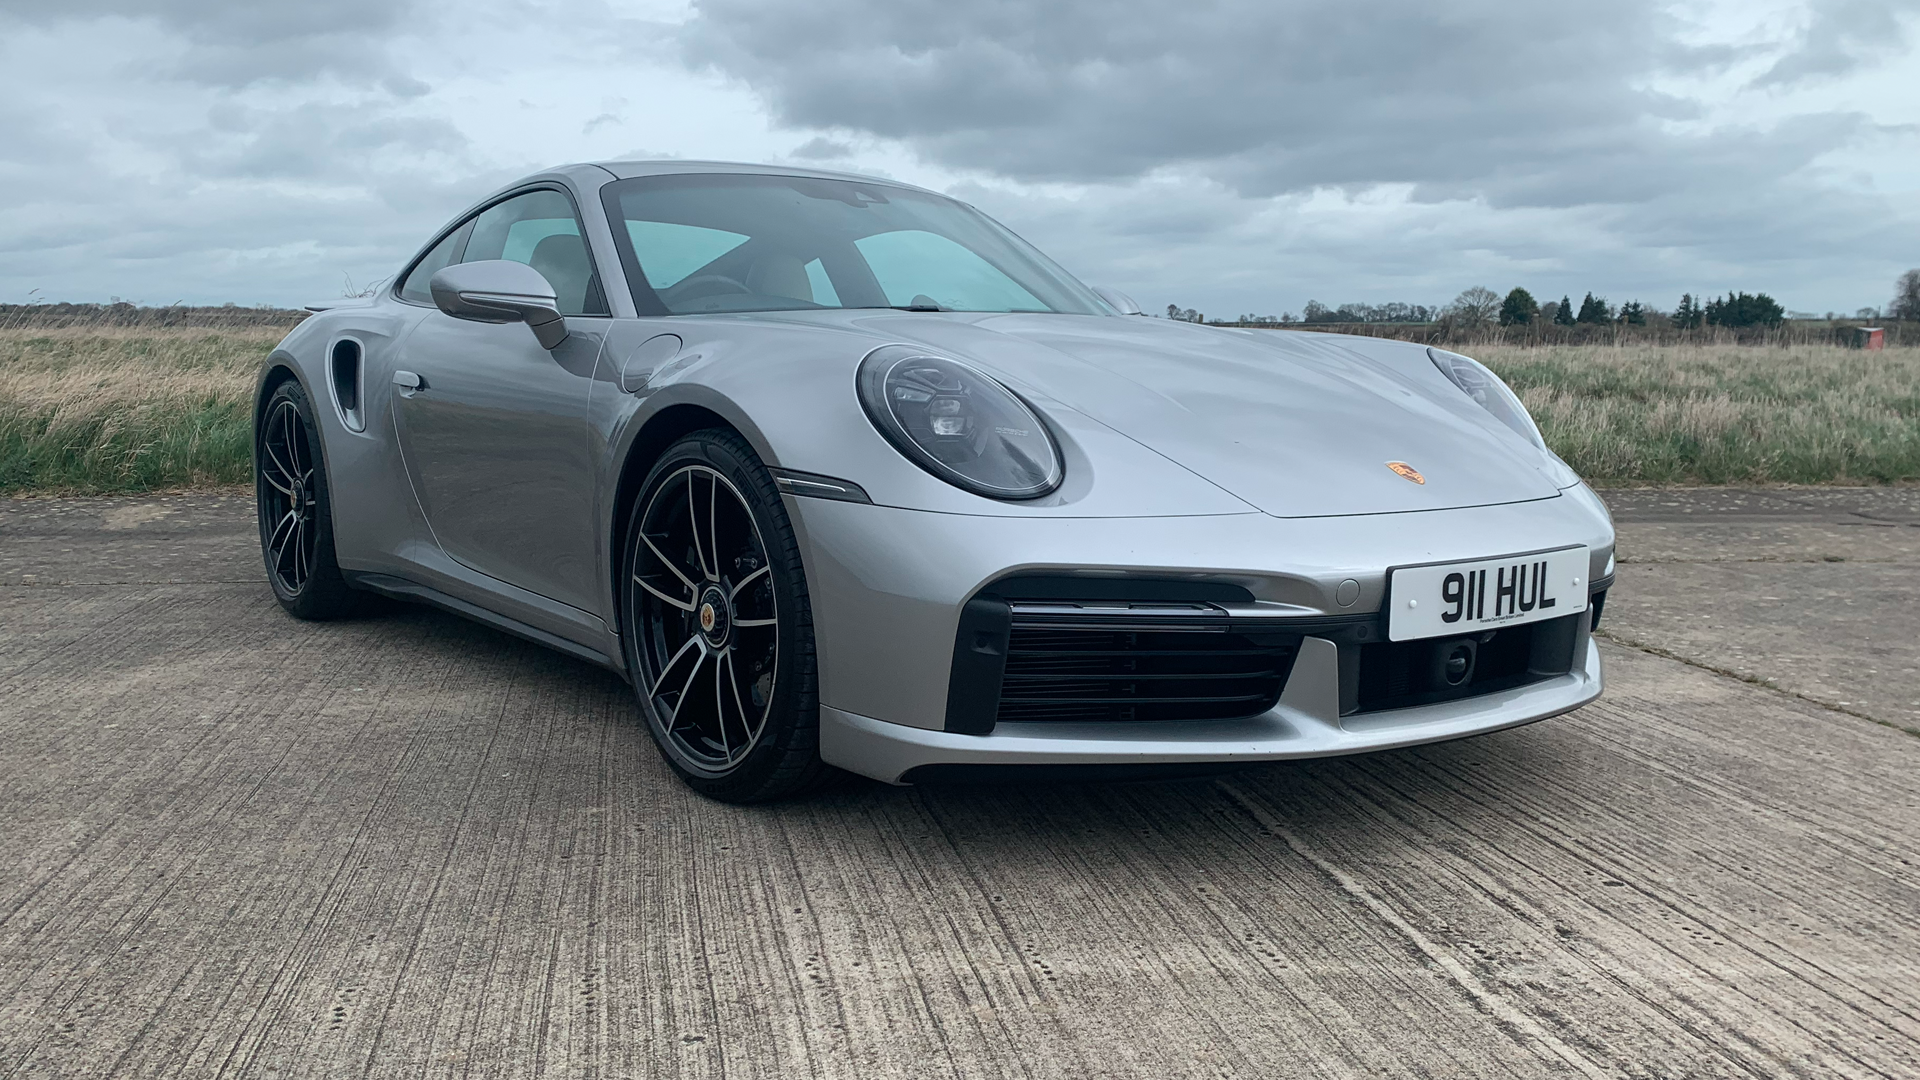 Mat's new daily driver revealed: the Porsche 911 Turbo S